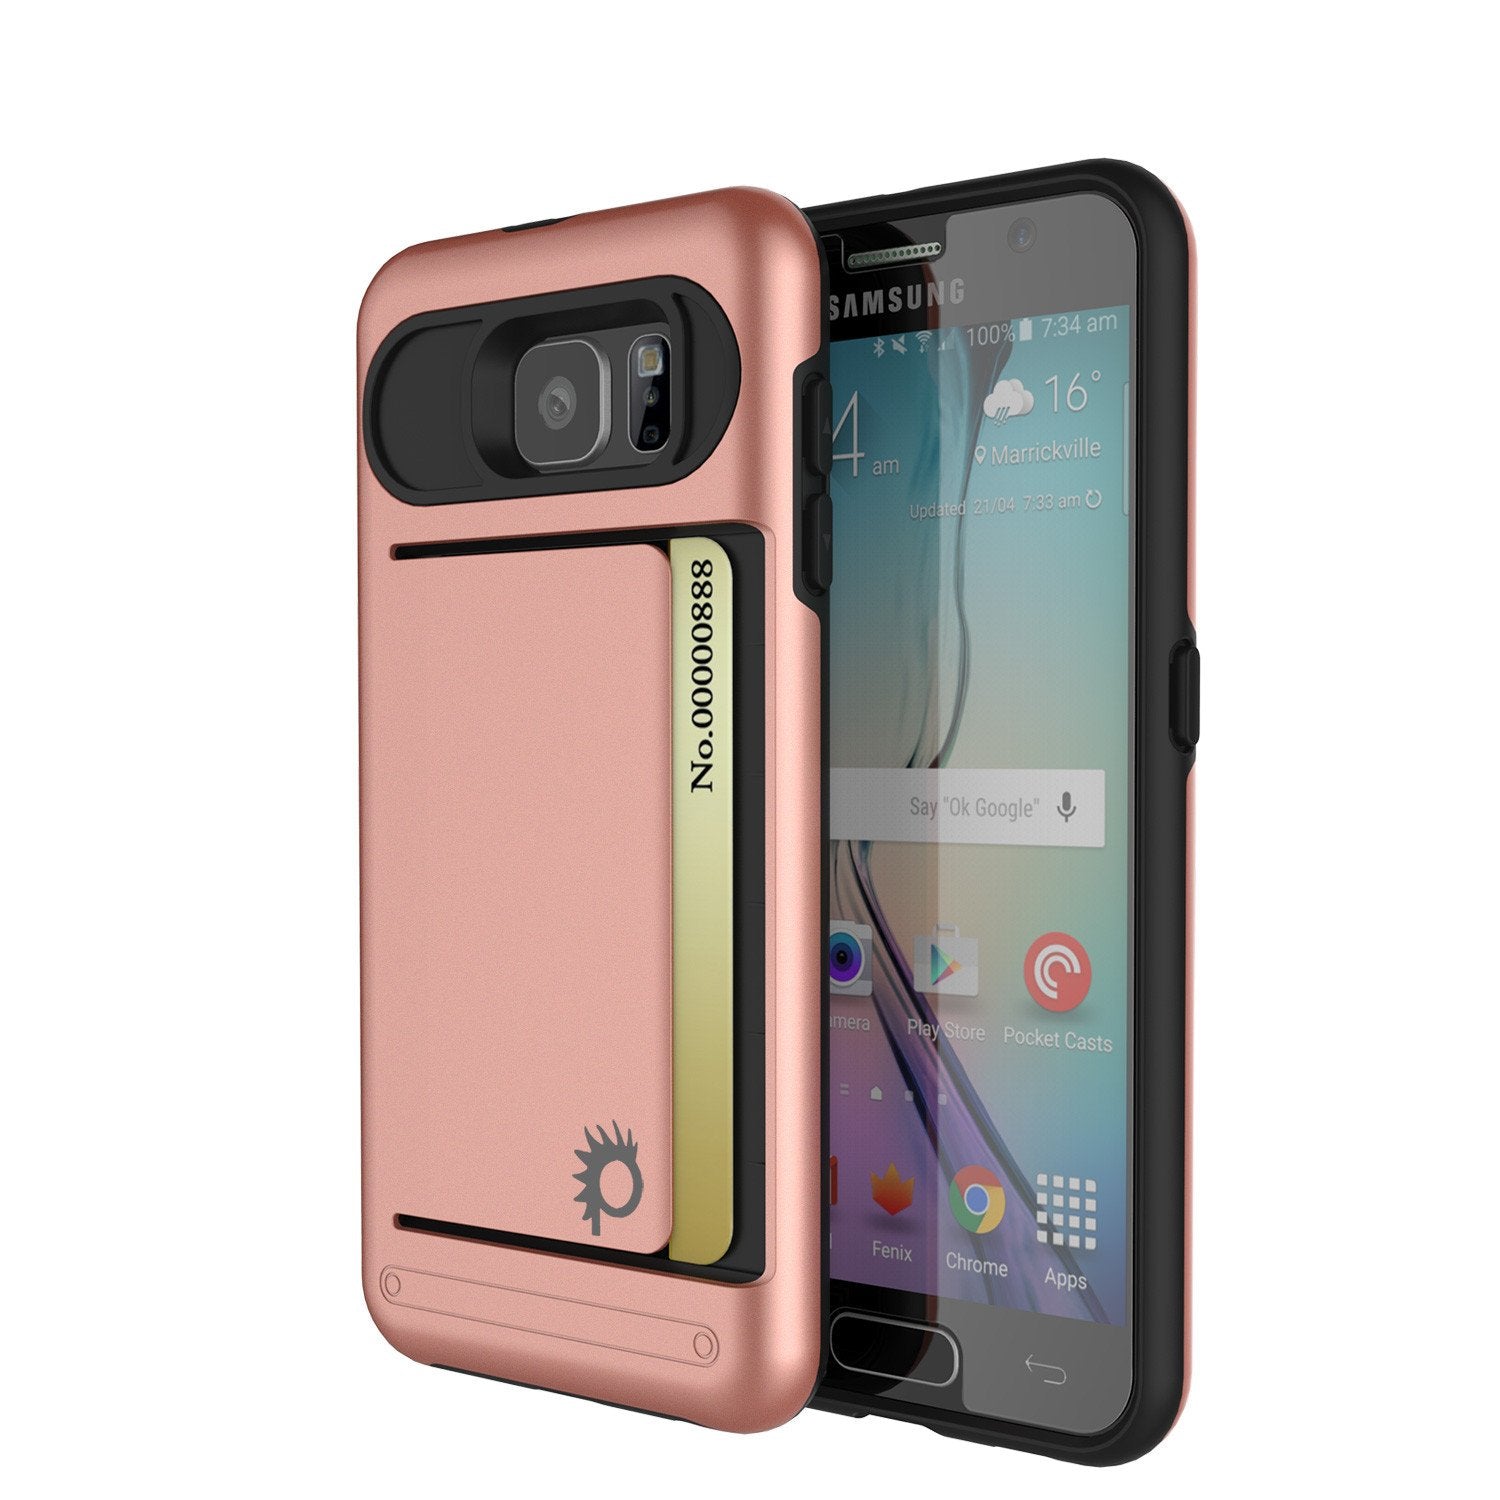 Galaxy s6 Case PunkCase CLUTCH Rose Gold Series Slim Armor Soft Cover Case w/ Tempered Glass